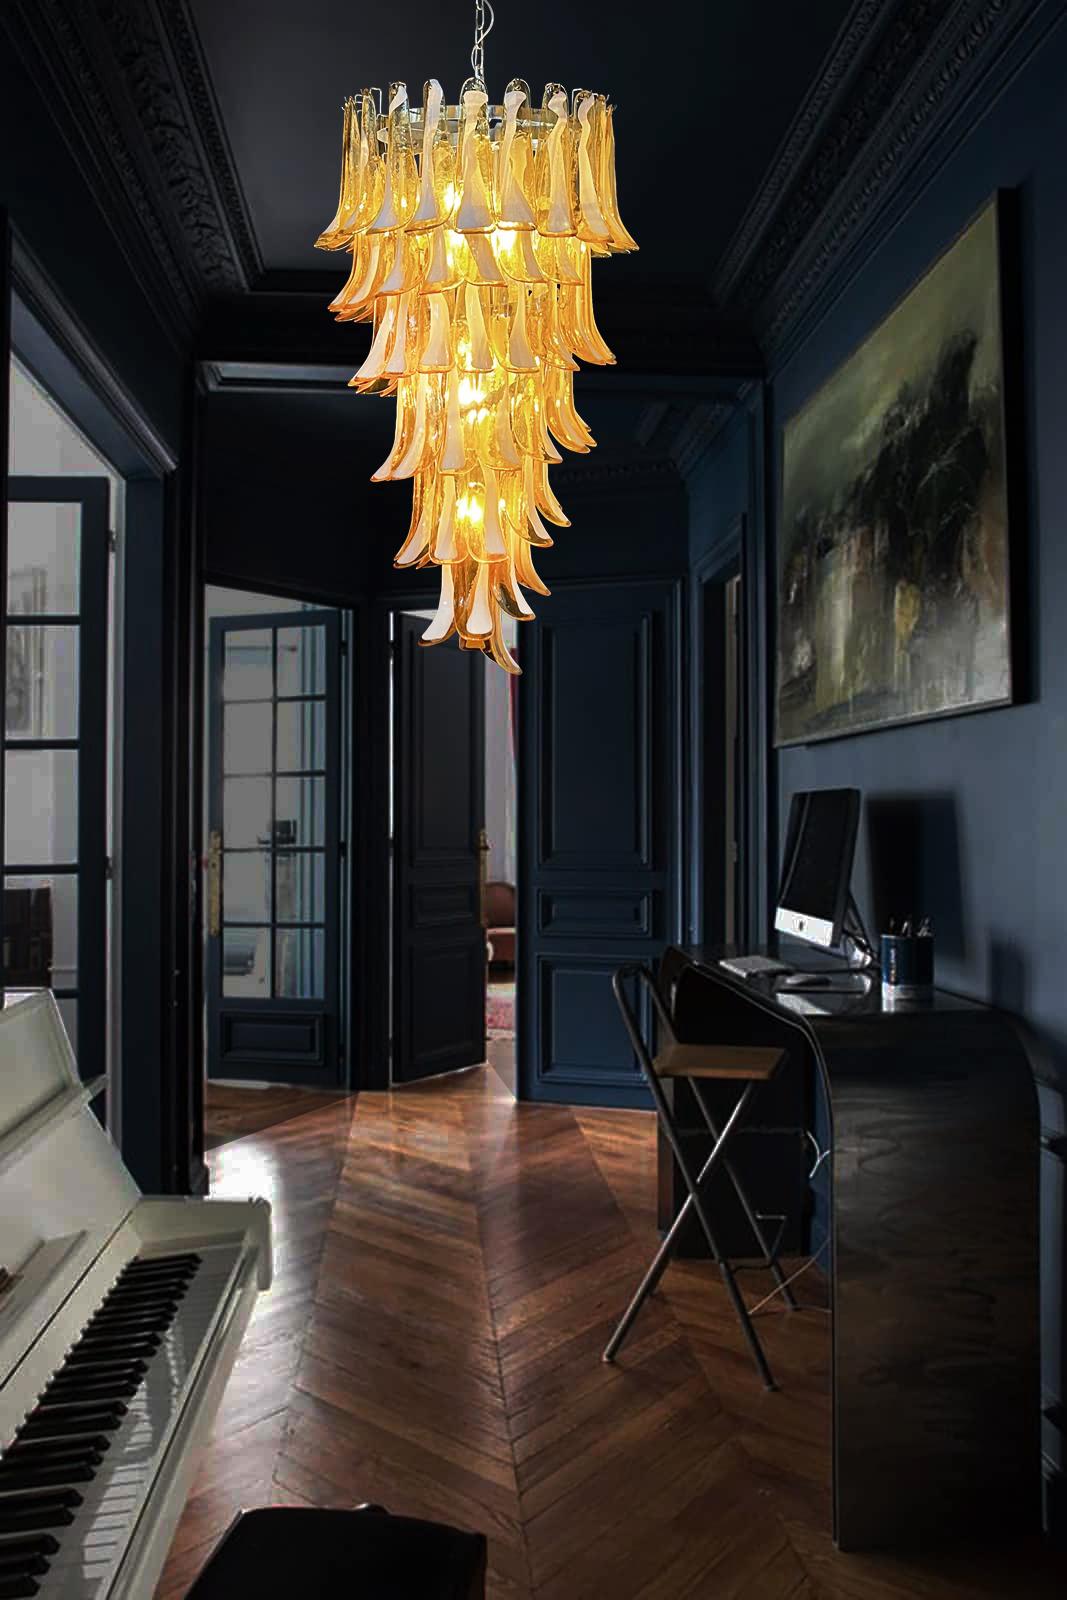 Beautiful and huge Italian Murano Chandeliers each composed by 83 splendid glass petals (amber with white spot) that give a very elegant look. The glasses of this chandelier are real works of art. The glasses descend with a spiral shape.
Dimensions: